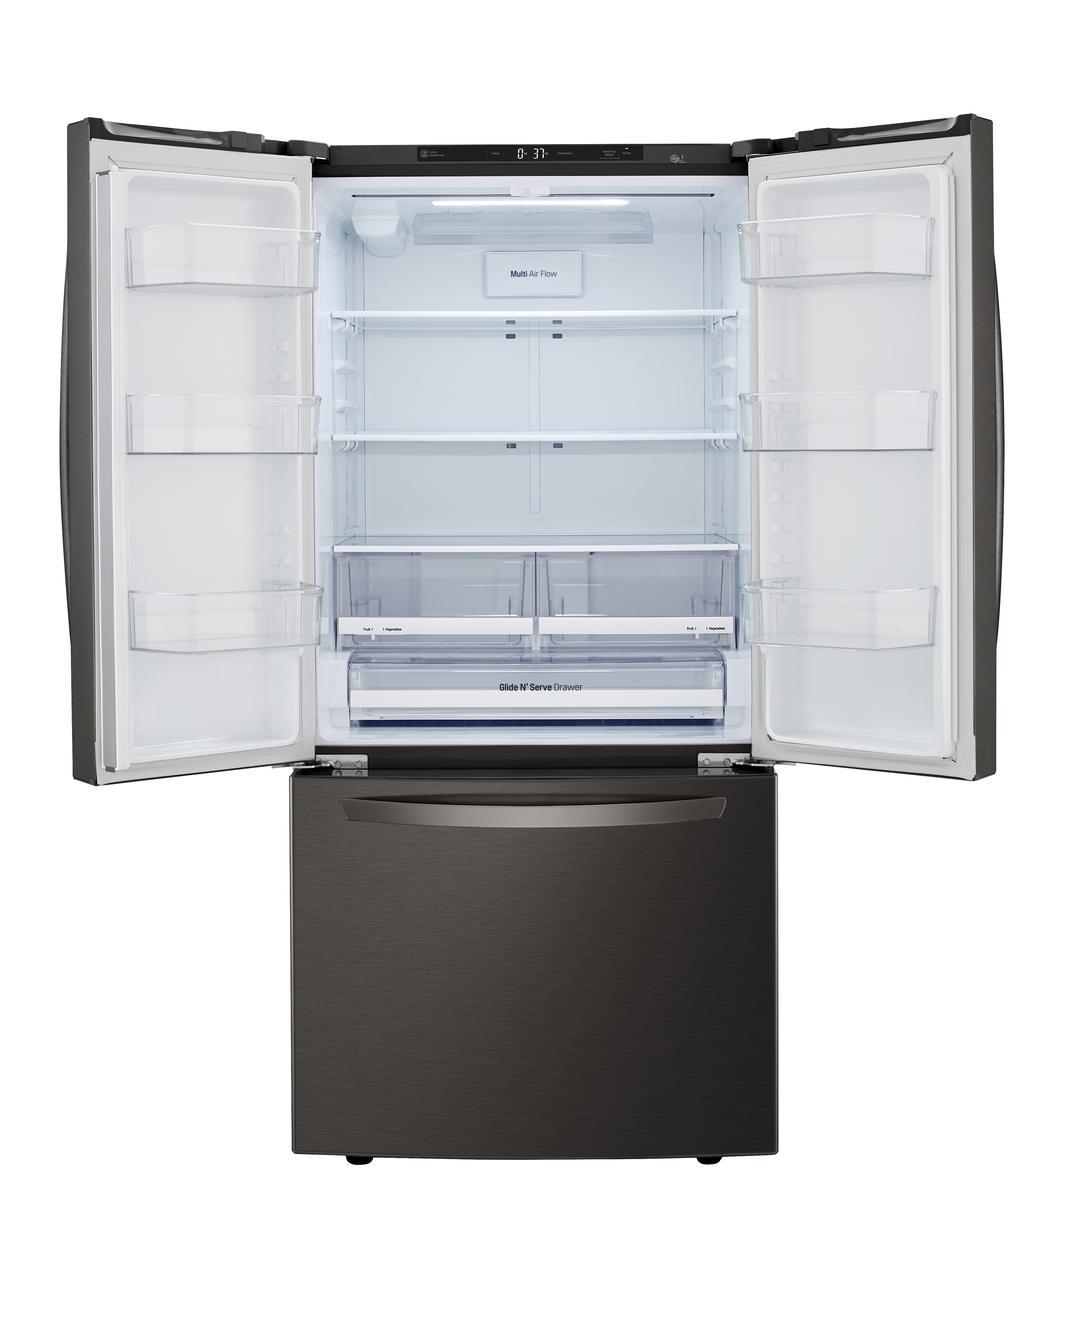 LG - 32.8 Inch 25.1 cu. ft French Door Refrigerator in Black Stainless - LRFCS2503D